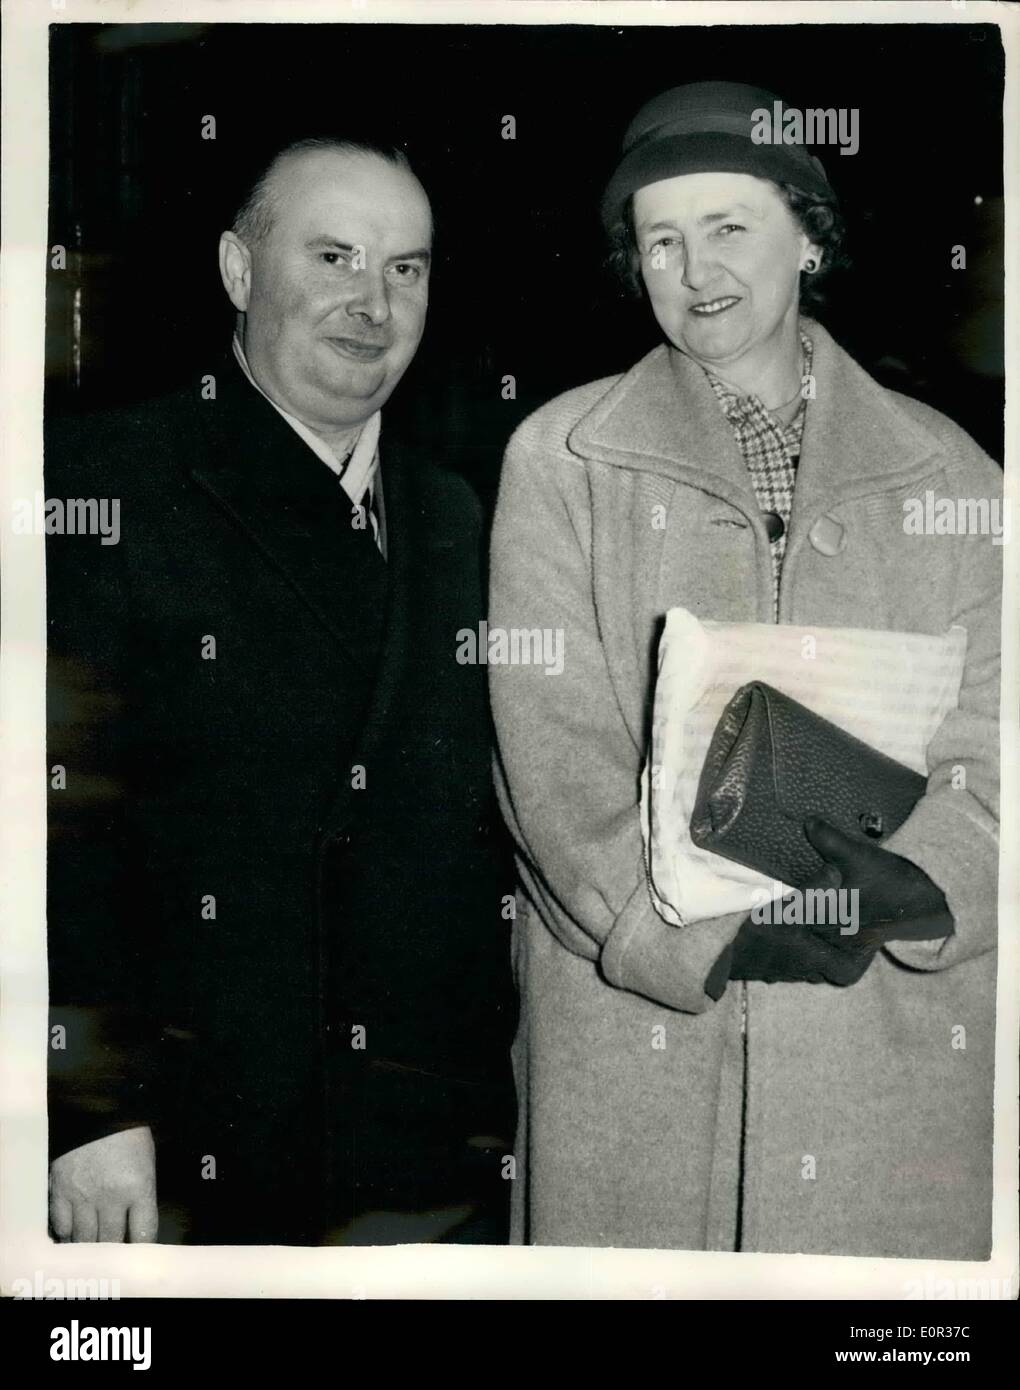 Nov. 11, 1957 - Doctor cleared of ''Infamous Professional Conduct'' change: Dr. Gwyn Morgan, the Rhondda Valley GP and his wife Stock Photo